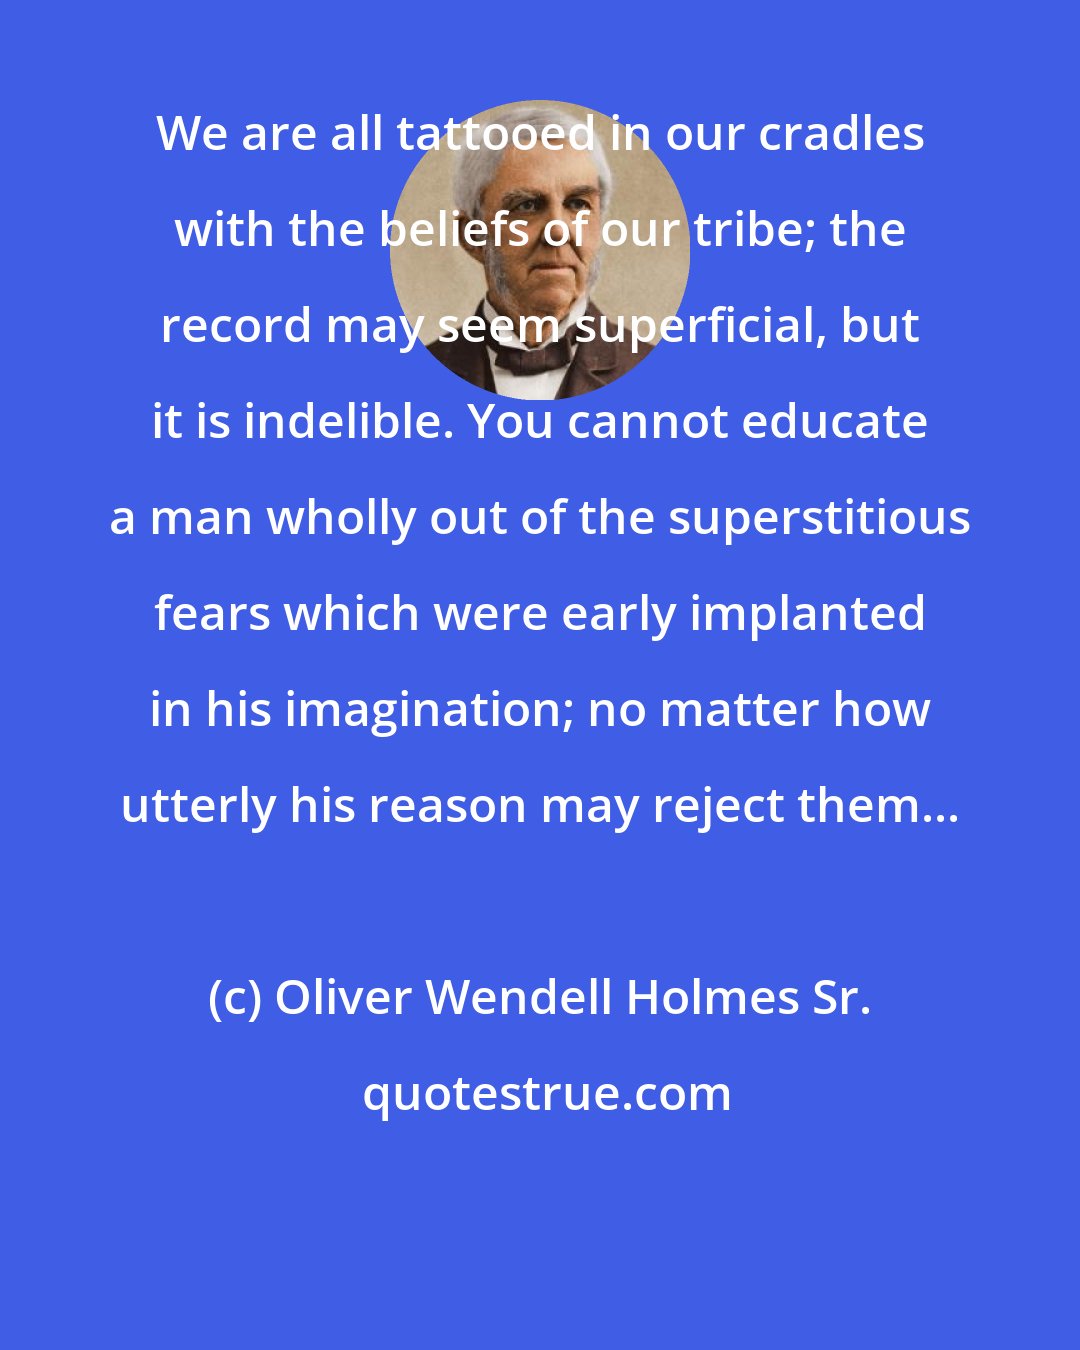 Oliver Wendell Holmes Sr.: We are all tattooed in our cradles with the beliefs of our tribe; the record may seem superficial, but it is indelible. You cannot educate a man wholly out of the superstitious fears which were early implanted in his imagination; no matter how utterly his reason may reject them...